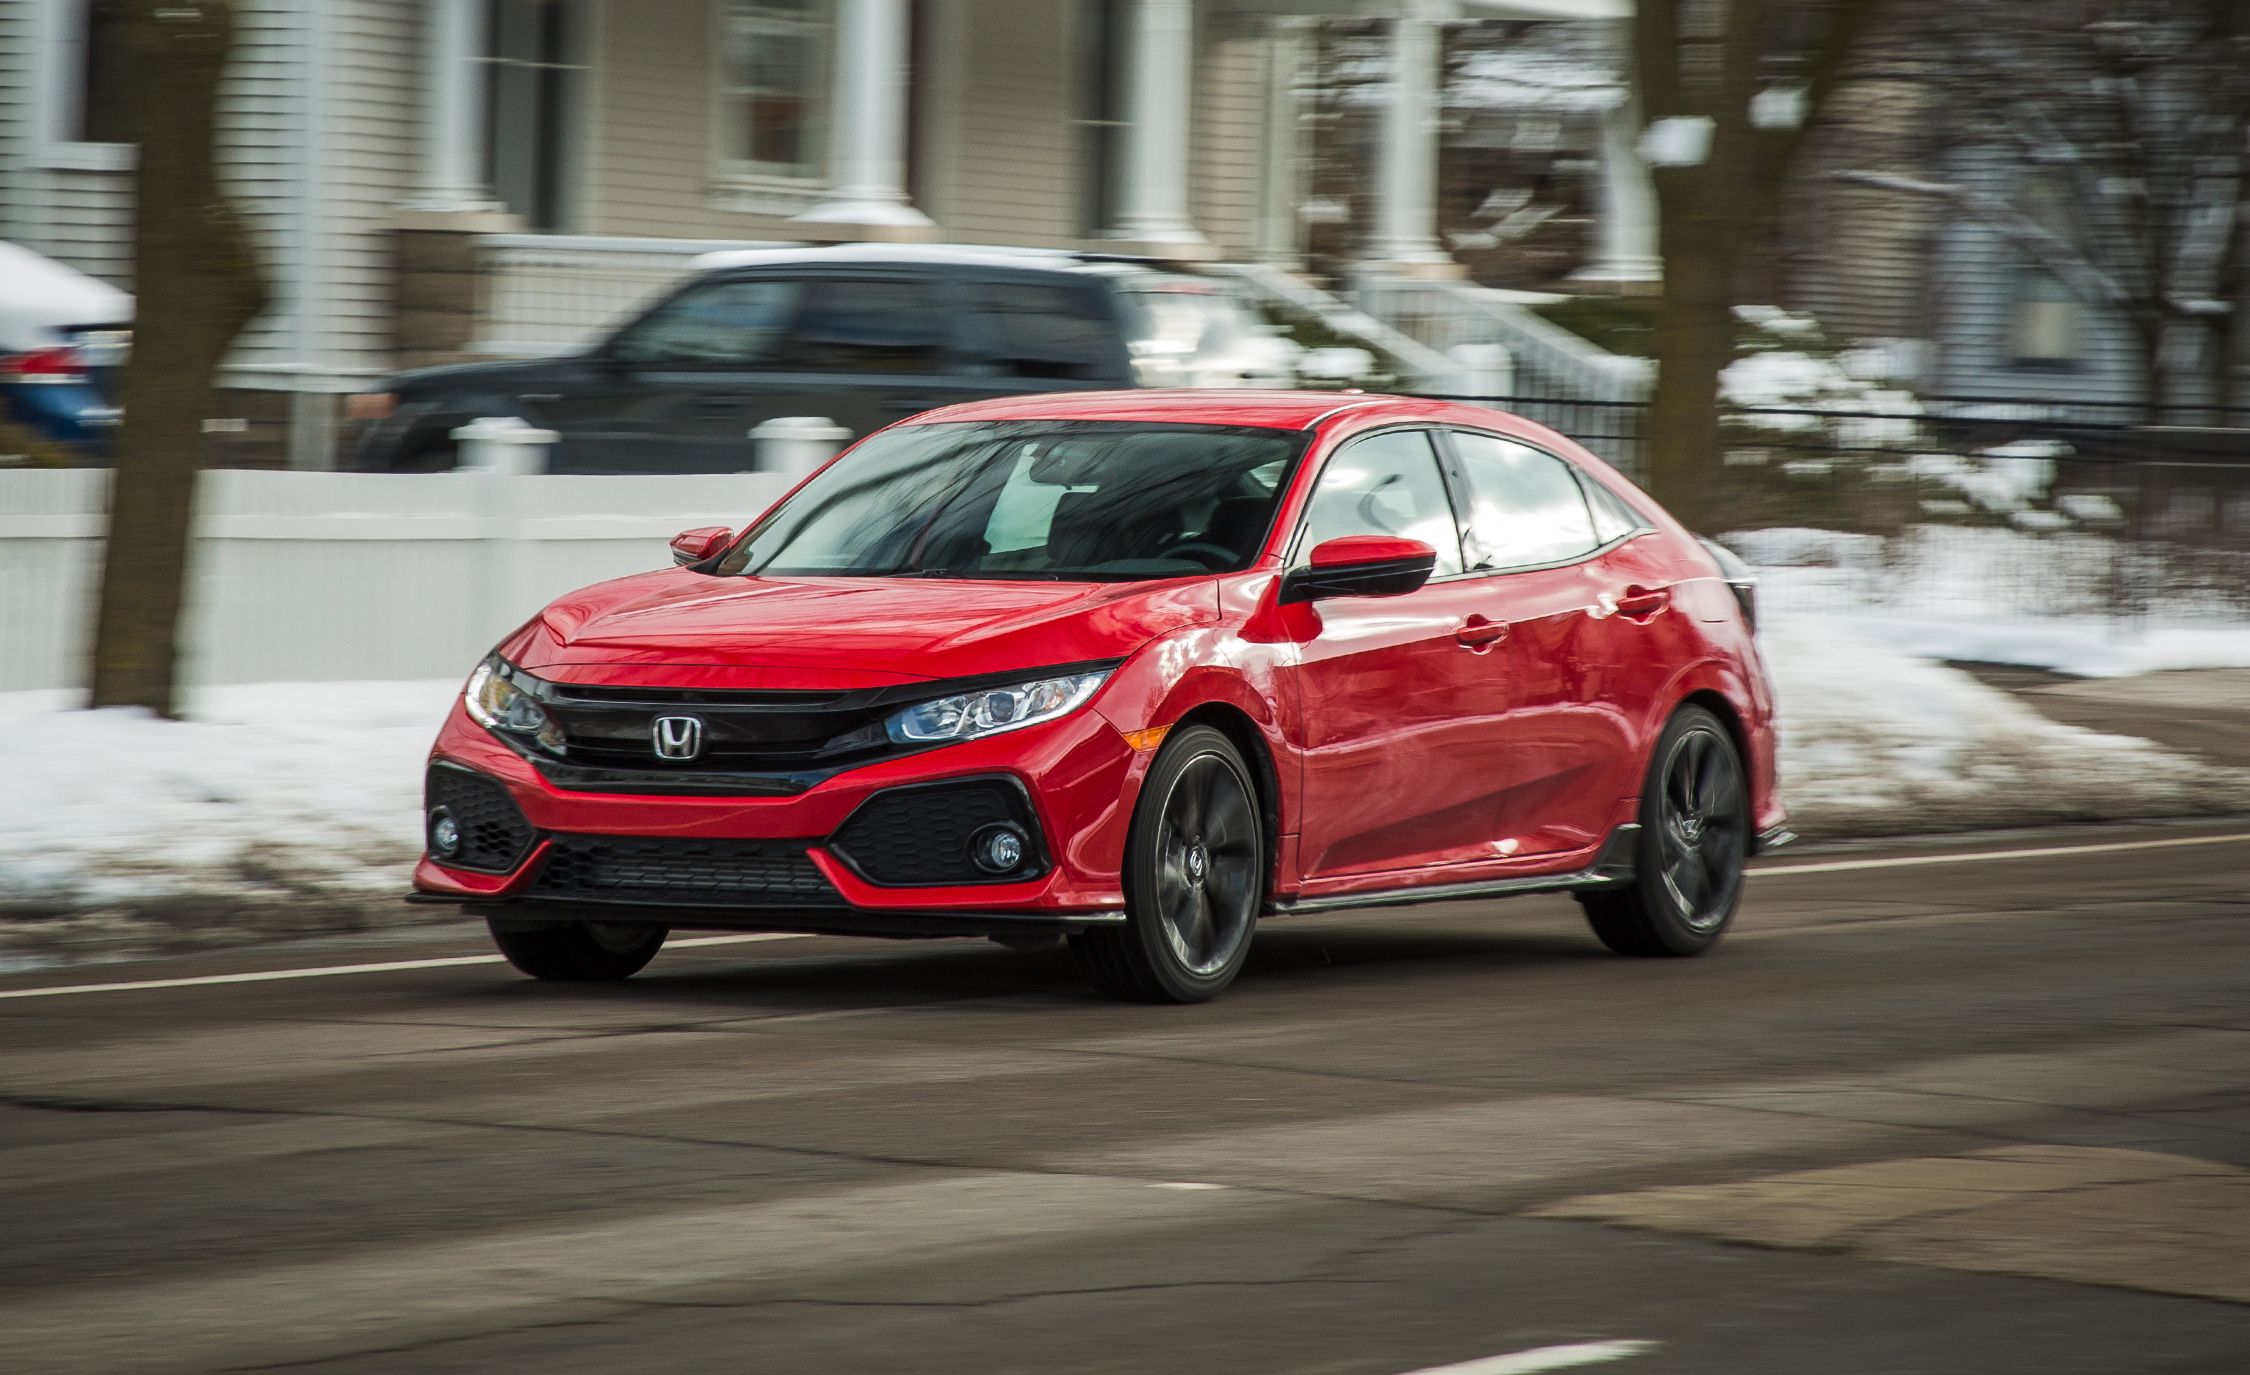 2017 Honda Civic Hatchback 15t Manual Test Review Car And Driver